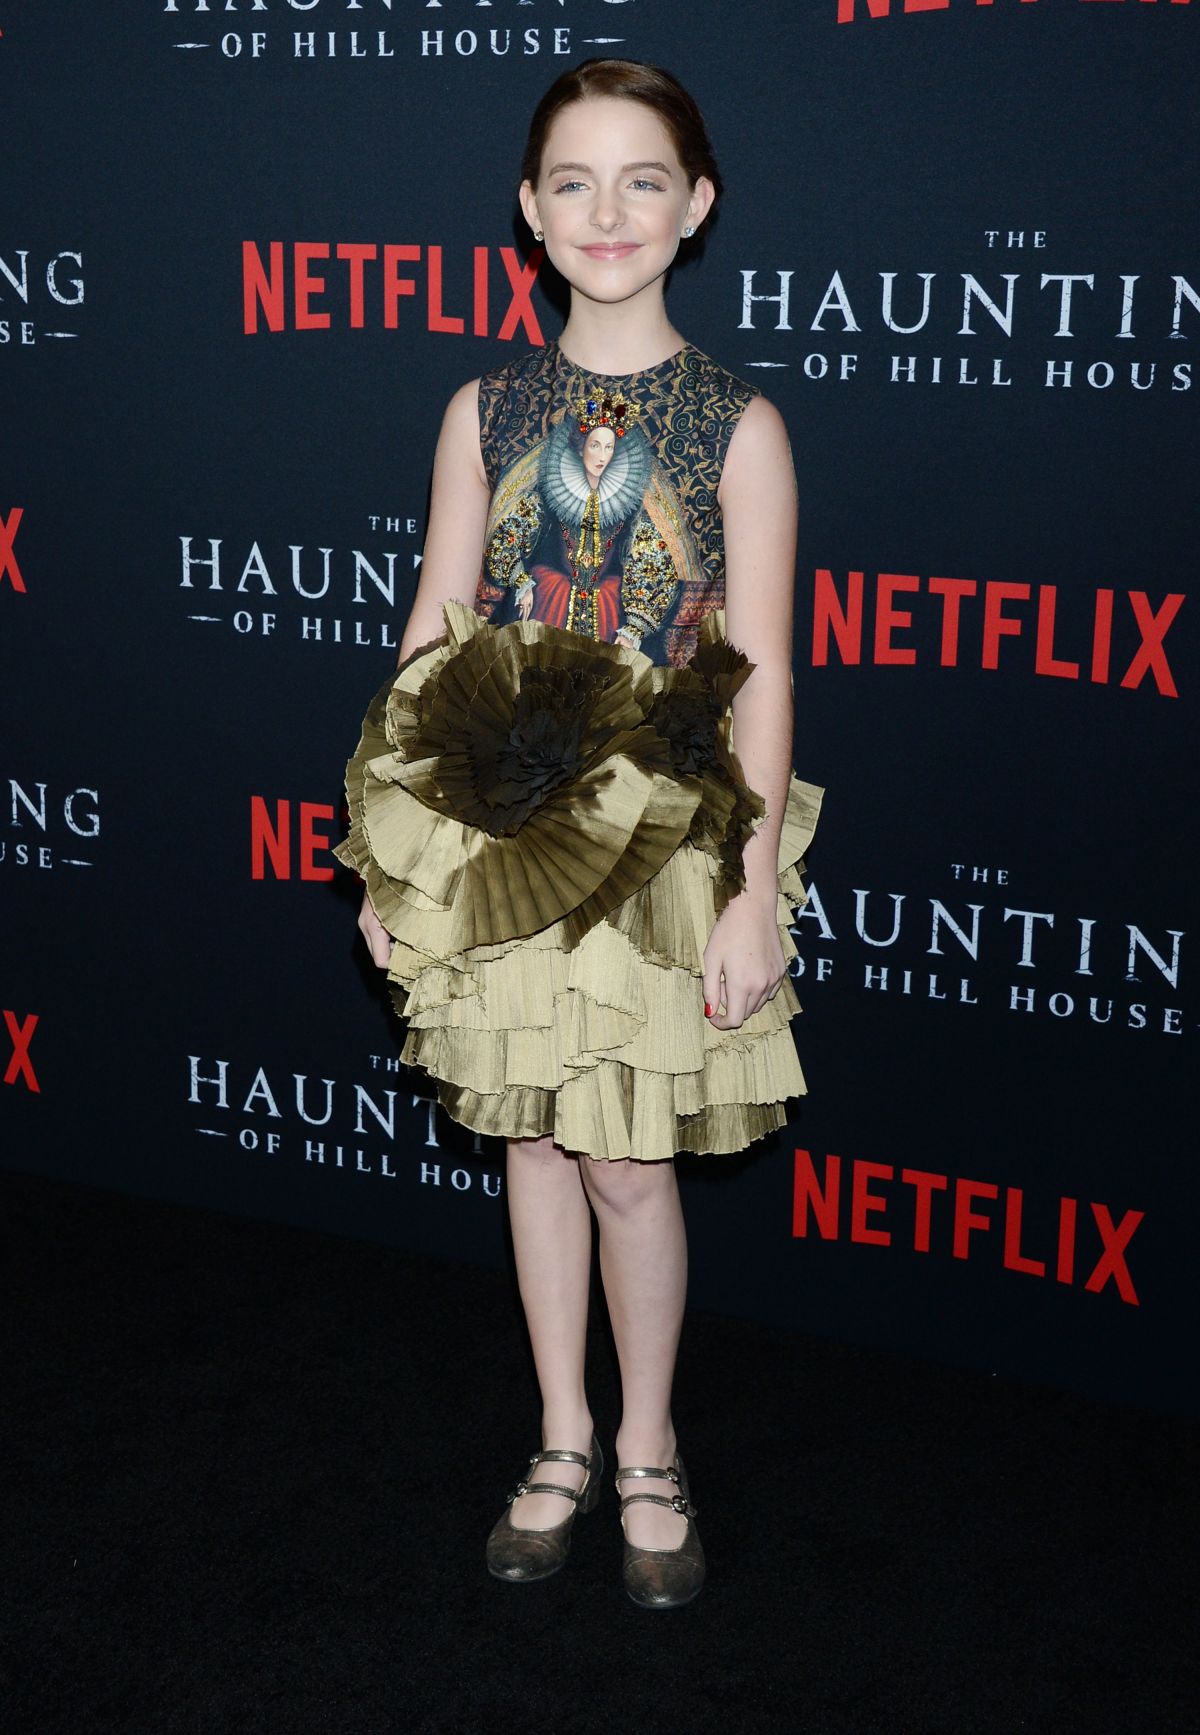 Mckenna Grace At The Haunting Of Hill House Premiere In Los